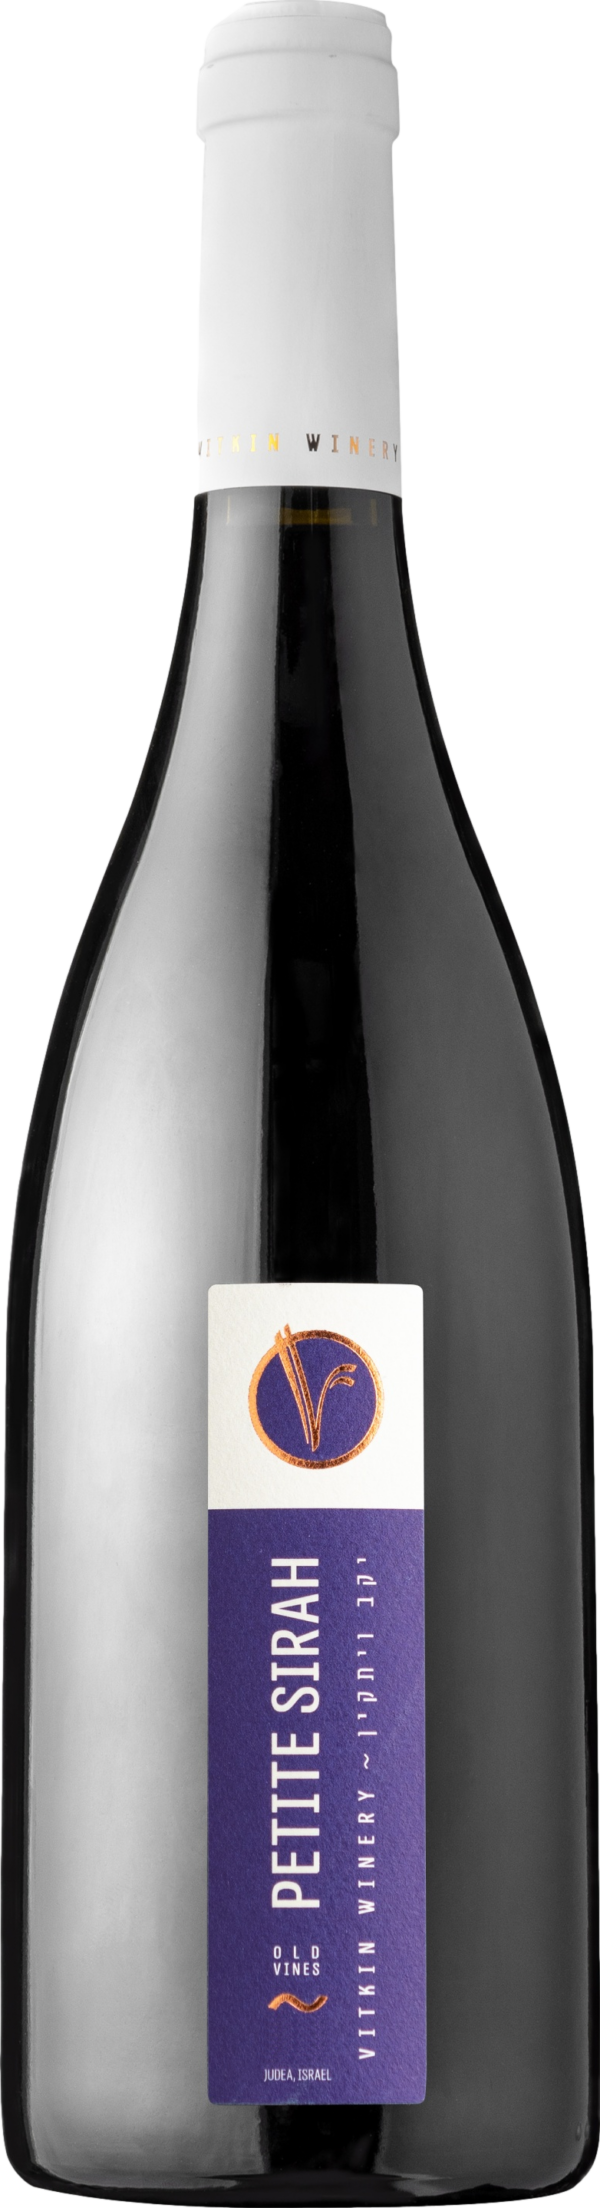 Product image of Vitkin Petite Sirah 2019 from 8wines